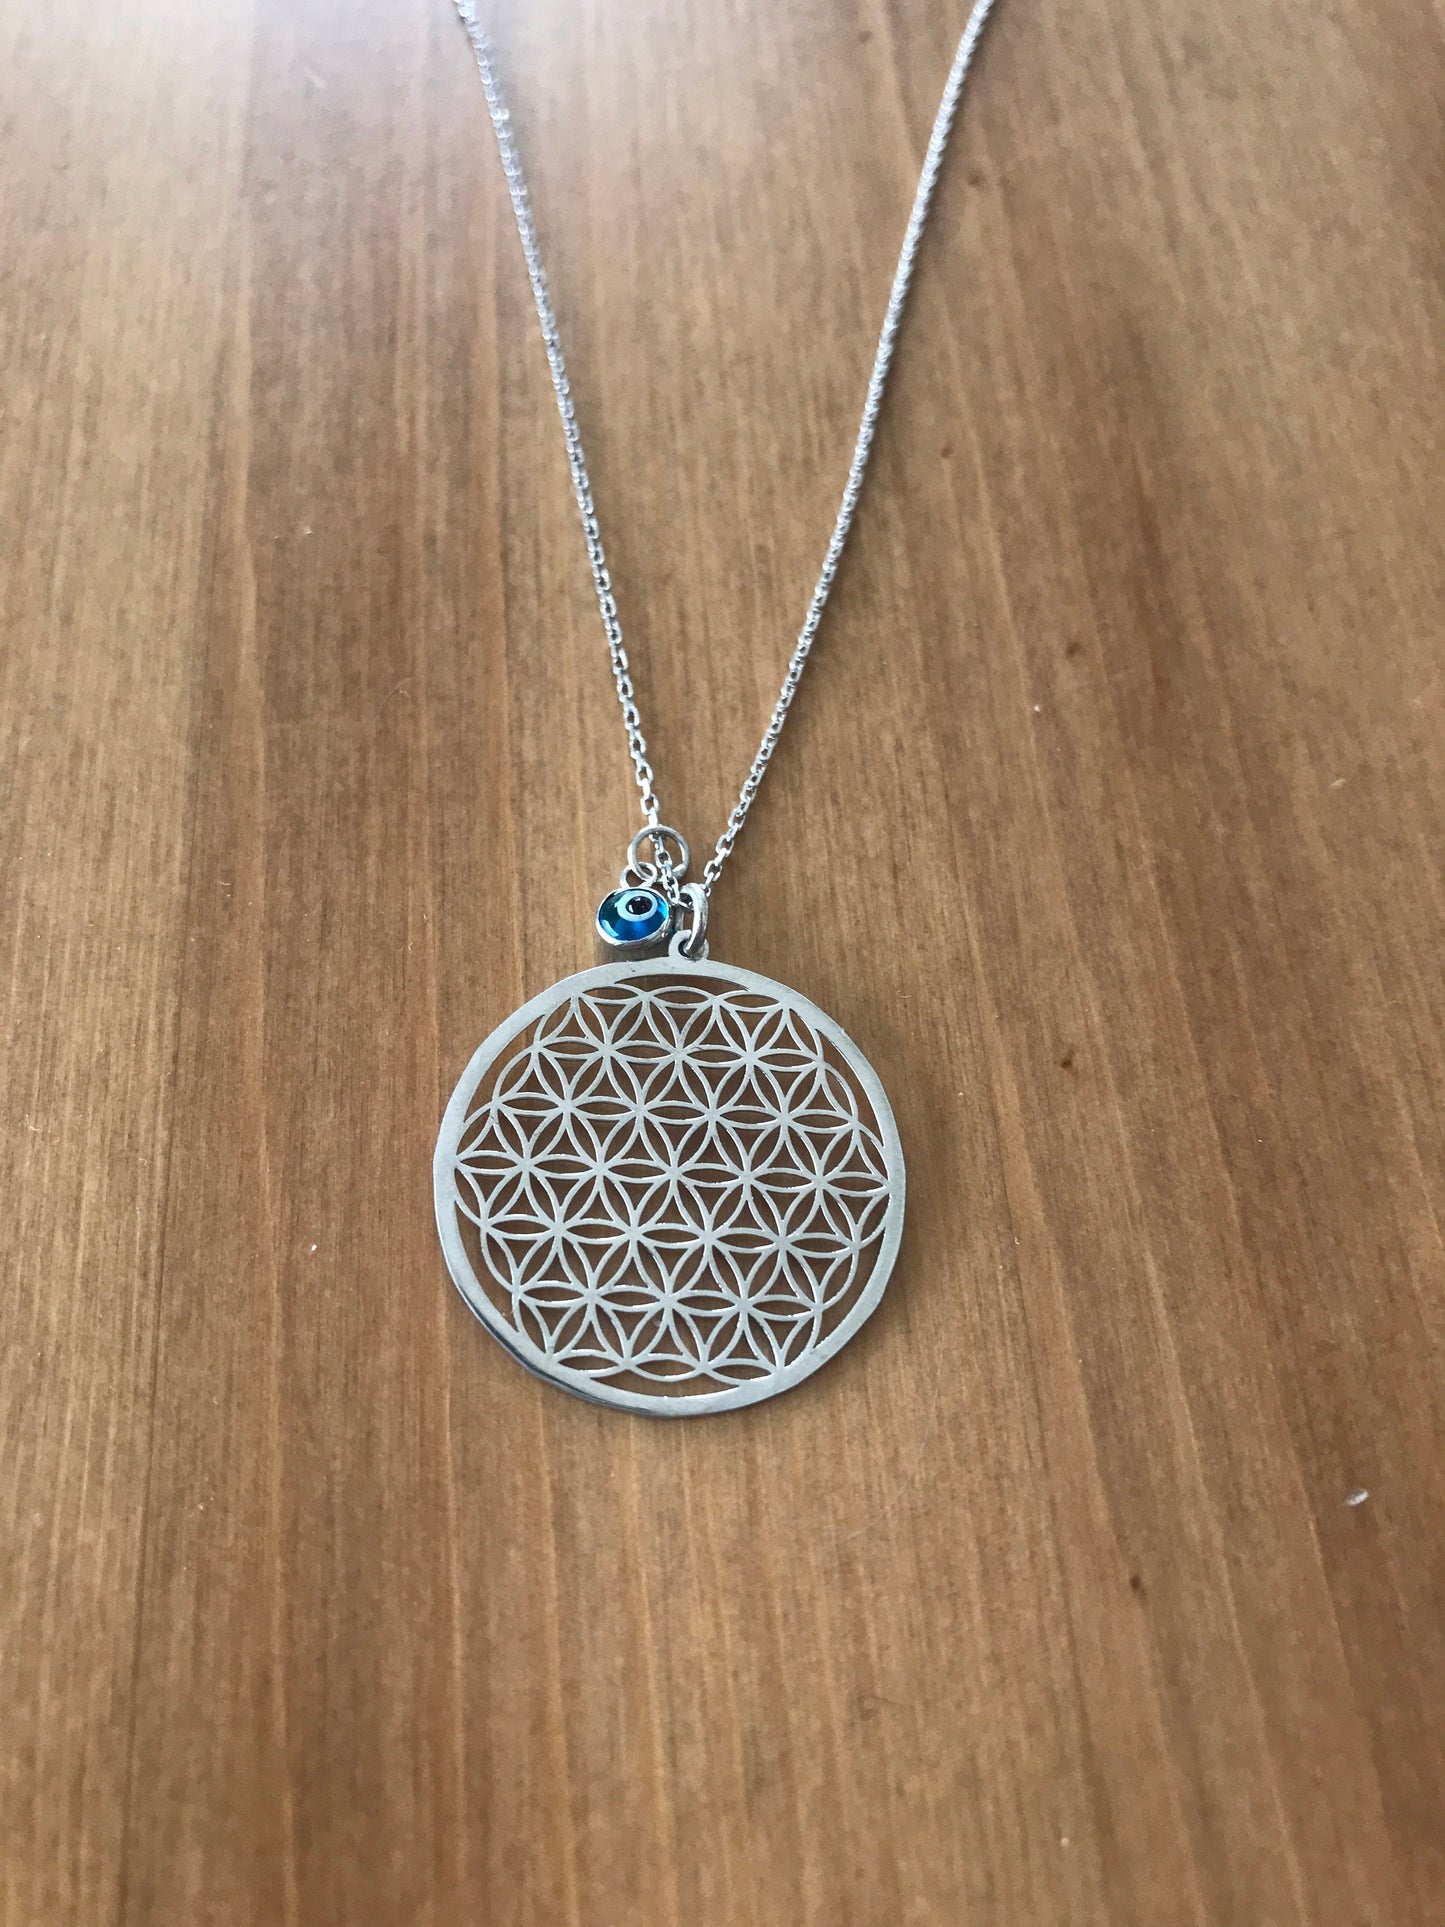 Unisex 925 Sterling Silver Flower of life Necklace